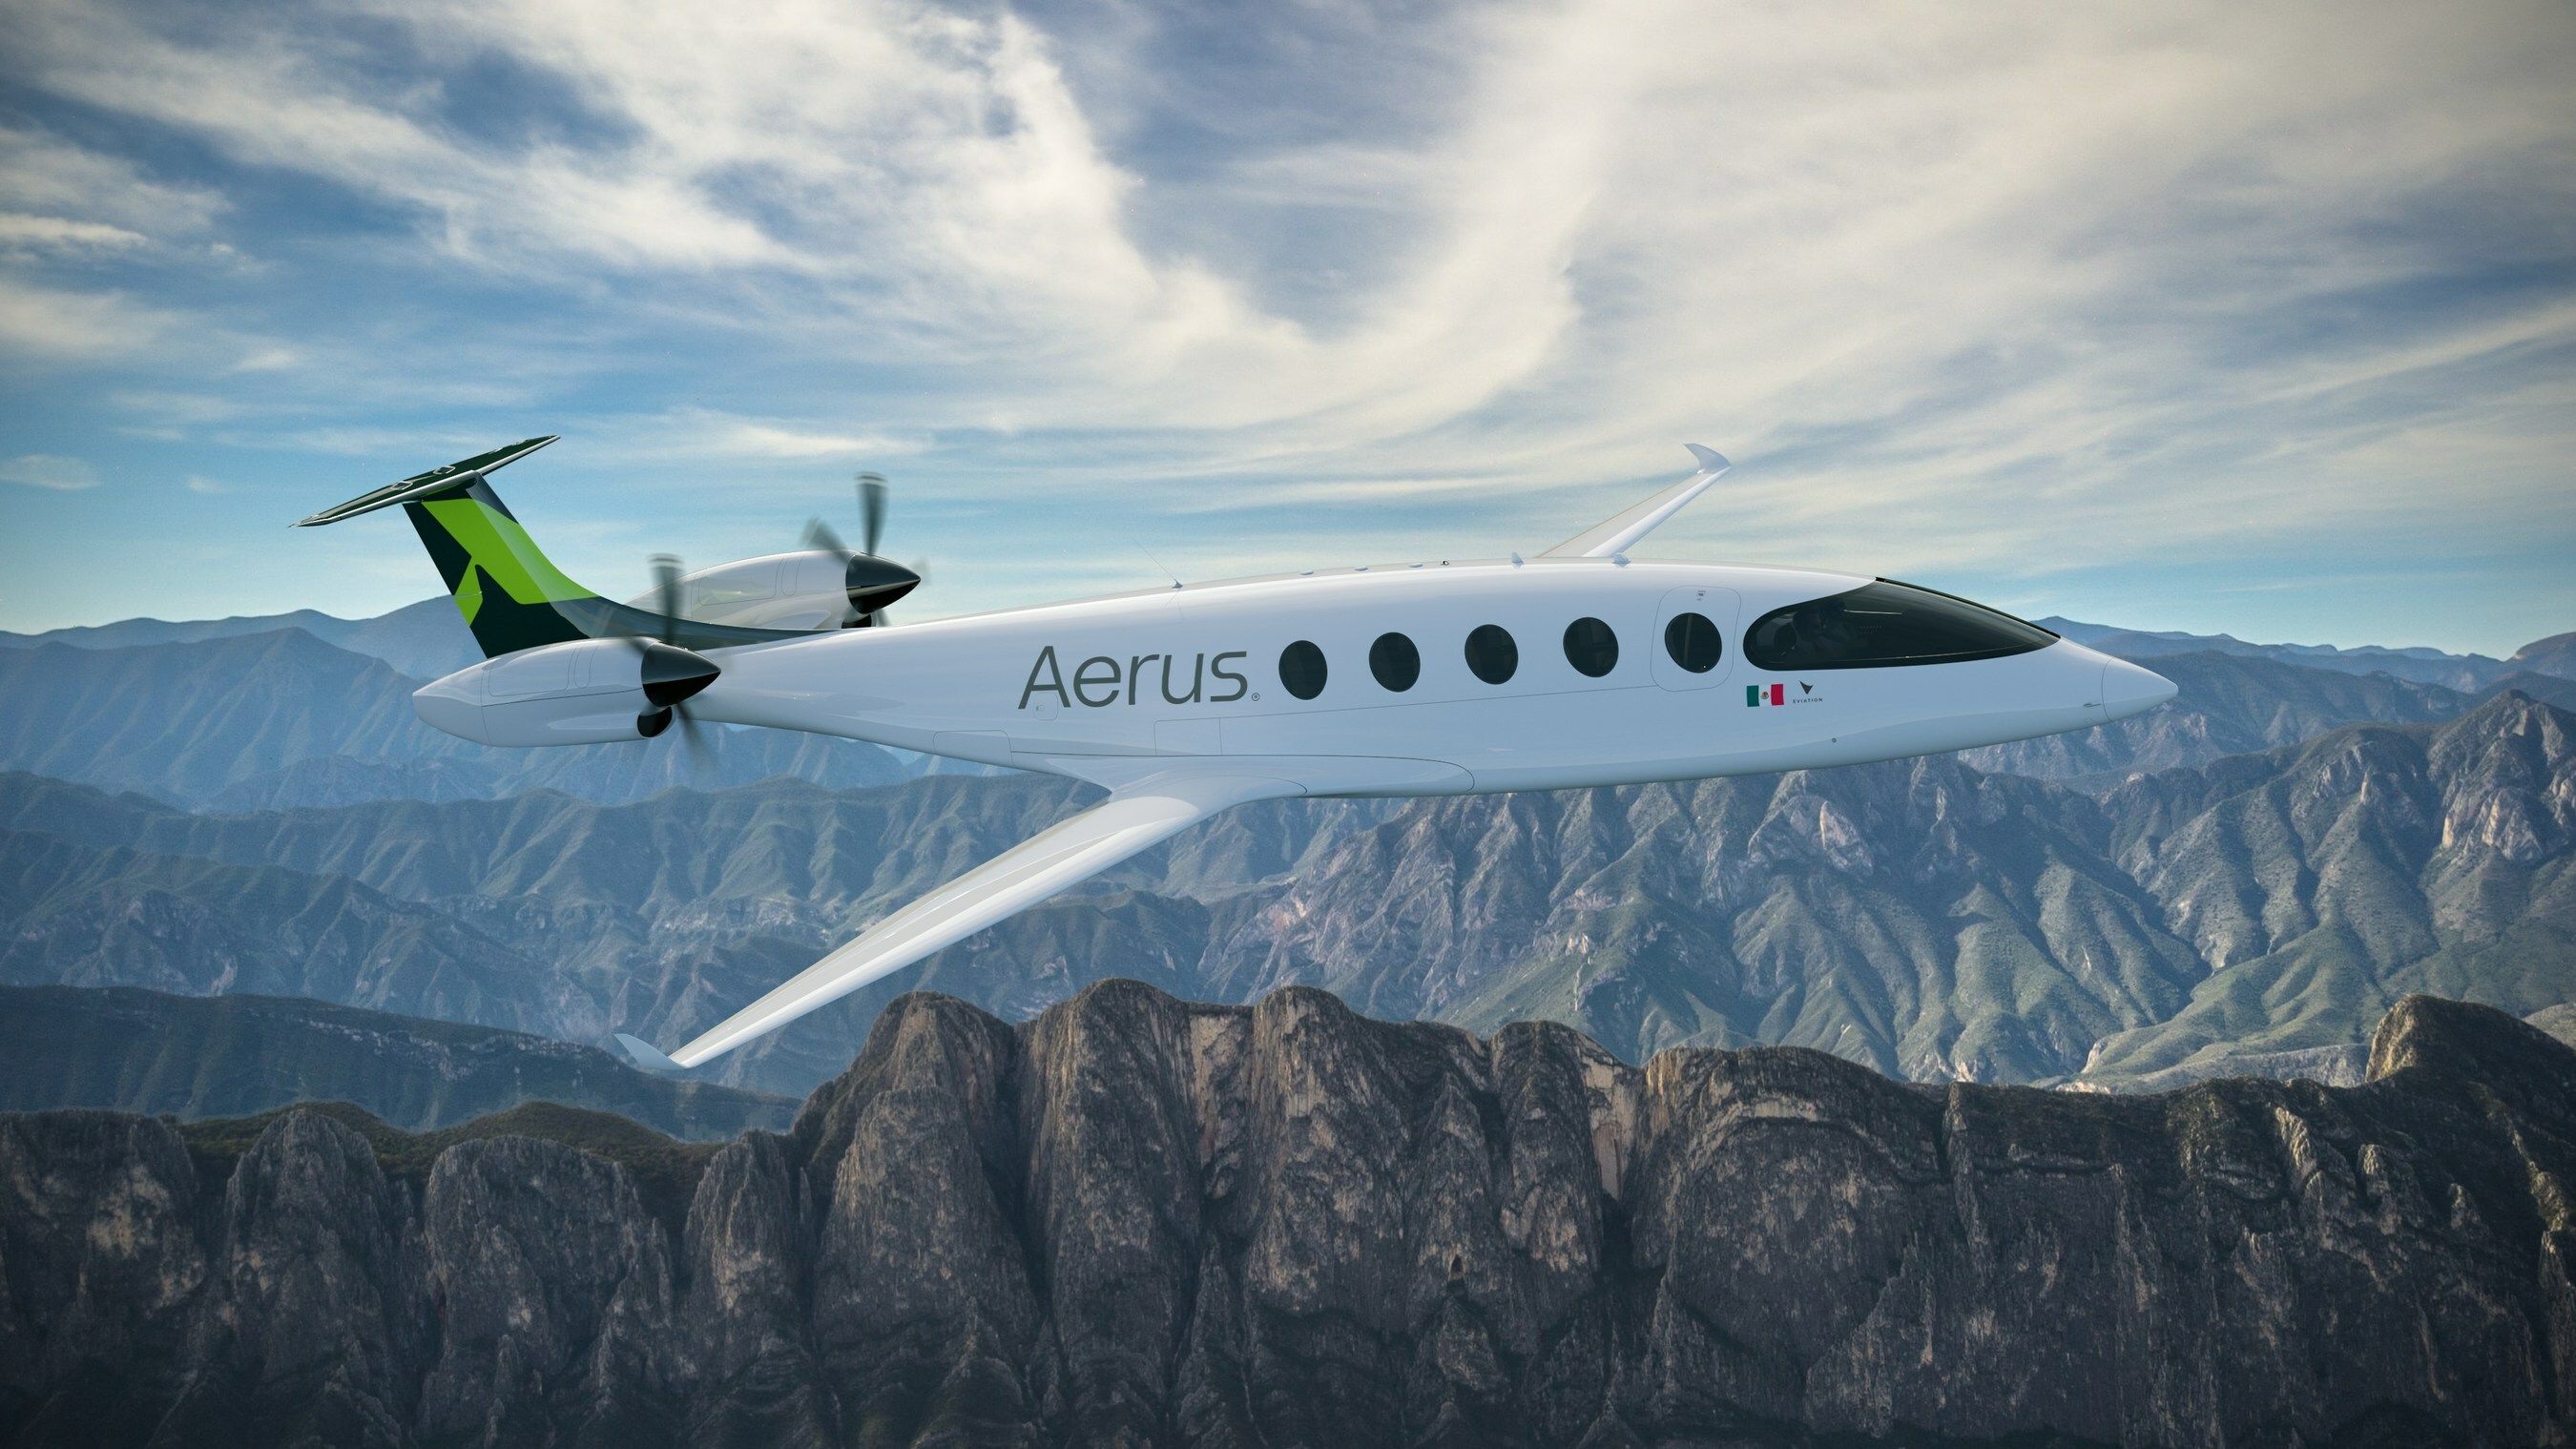 rendering of the Alice in Aerus livery